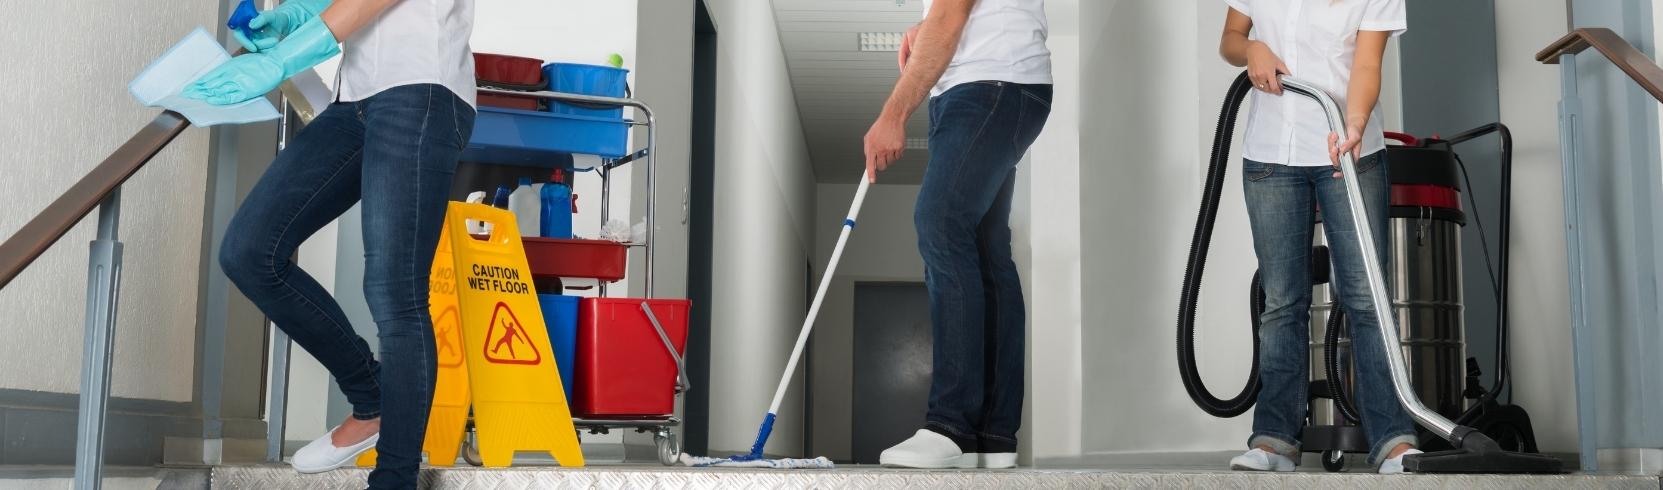 Bond Cleaning In Melbourne